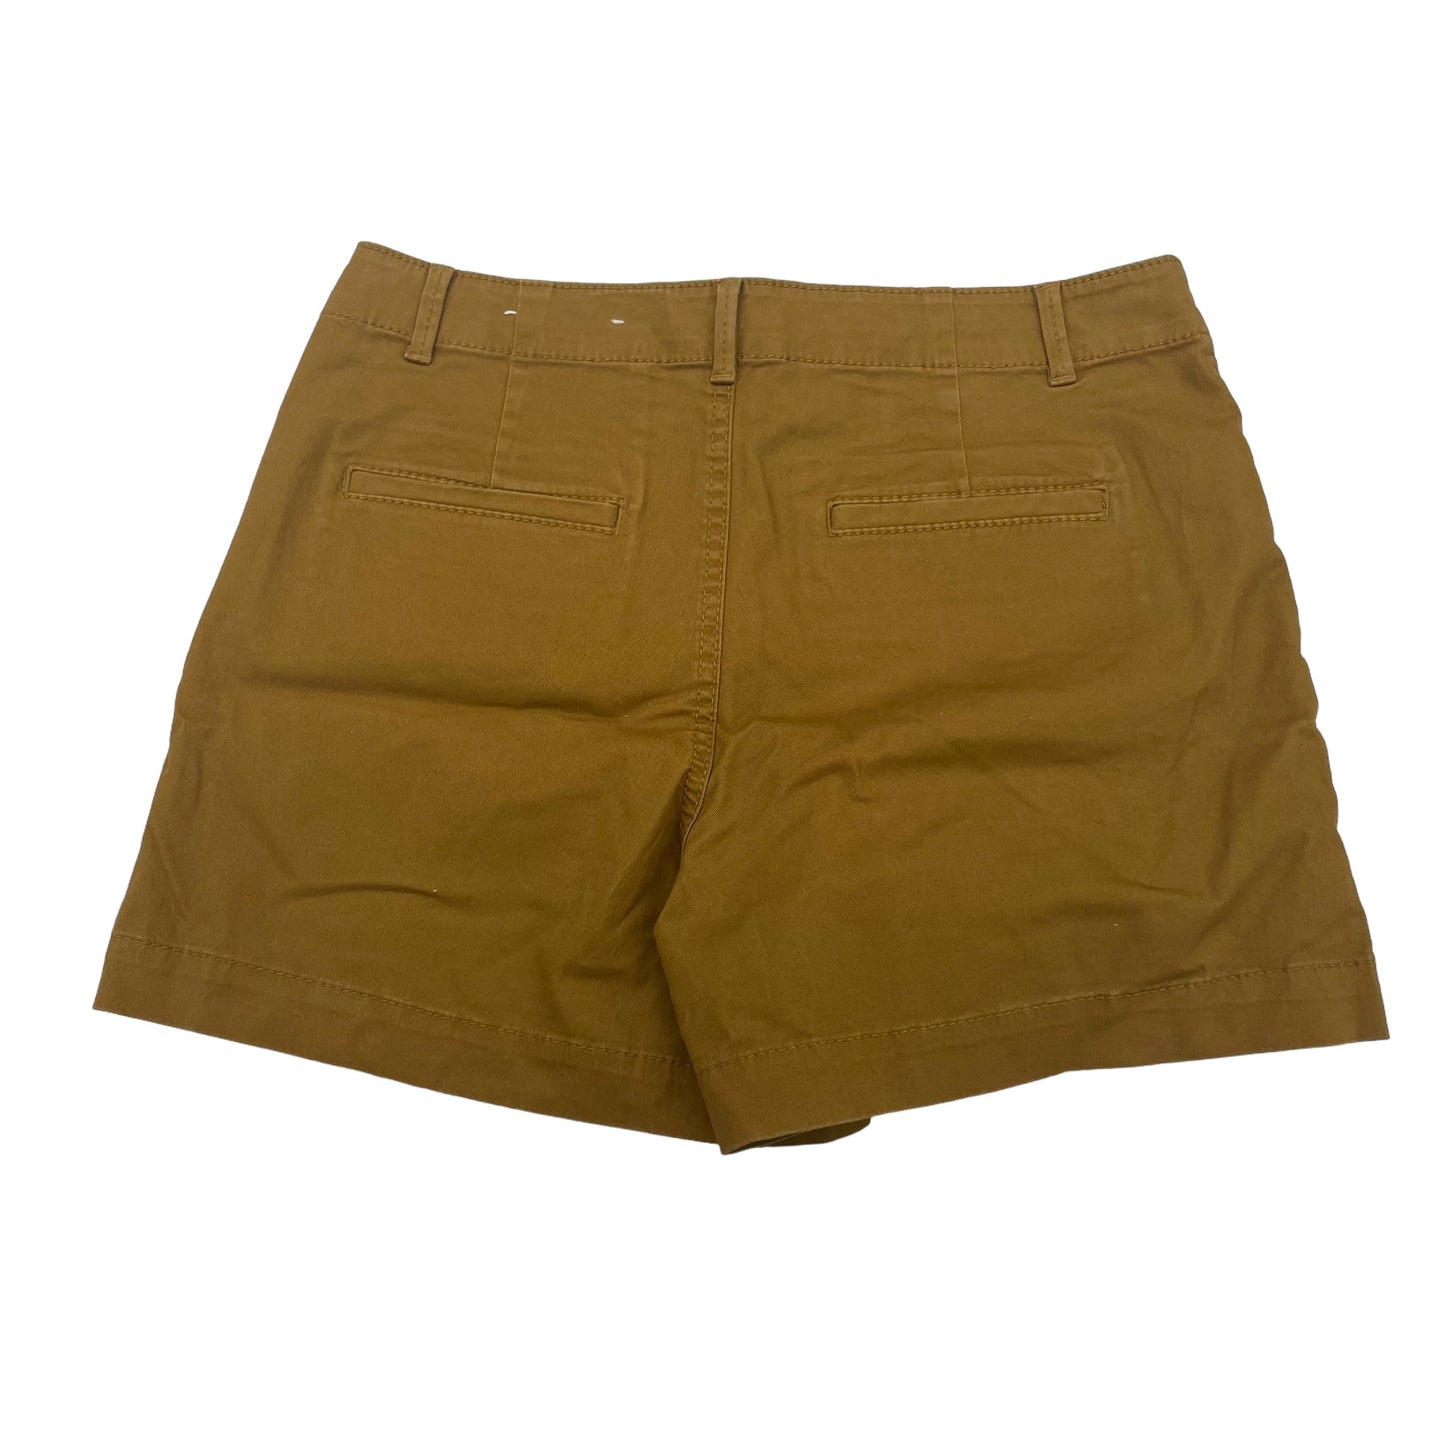 BROWN SHORTS by LOFT Size:8